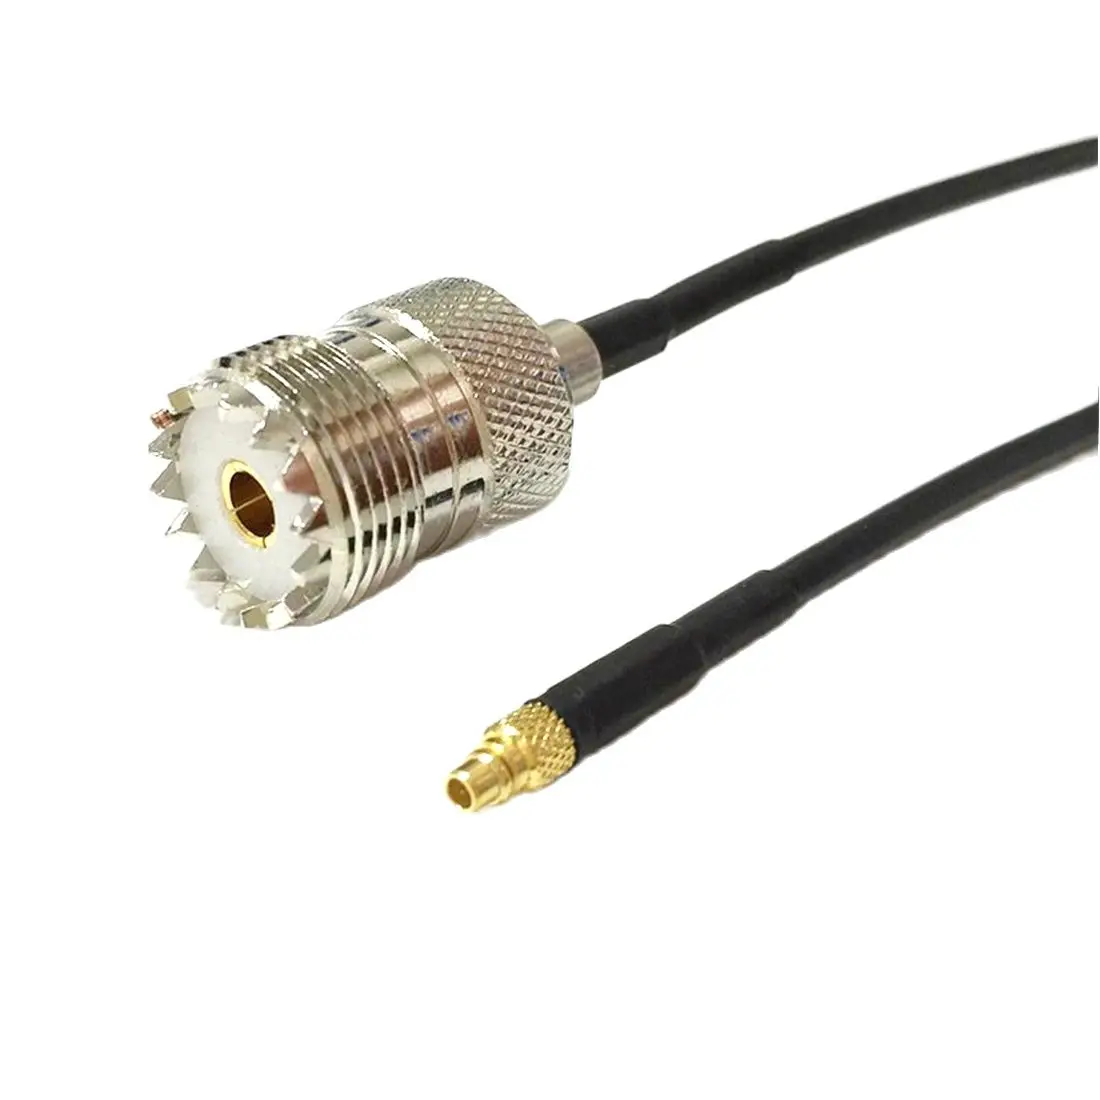 New Modem Coaxial Cable UHF Female Jack Connector Switch MMCX Male Plug Connector RG174 Cable 20CM 8inch Adapter 100cm tactic antenna sma male to sma female coaxial extend connection cable for uv 5r uv 82 uv 9r walkie talkie radio p9jd